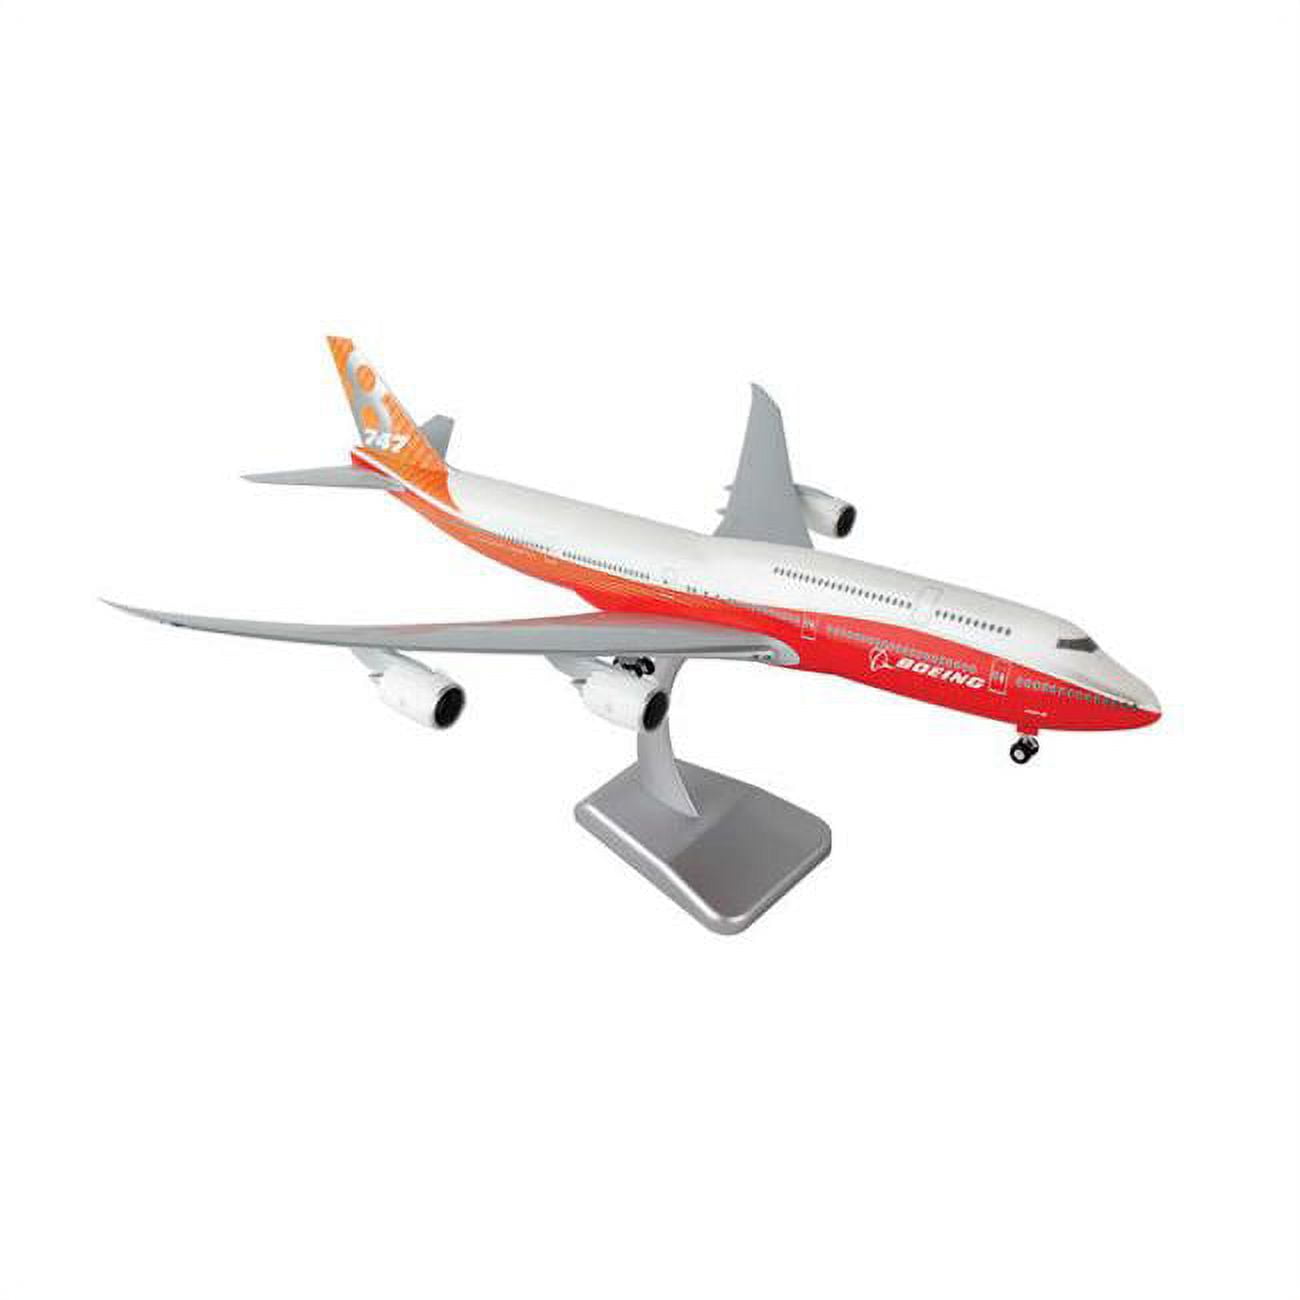 Hogan Wings Hg10864g 1 Isto 200 Boeing House 747-8 Red Tail With Gear Model Airplane